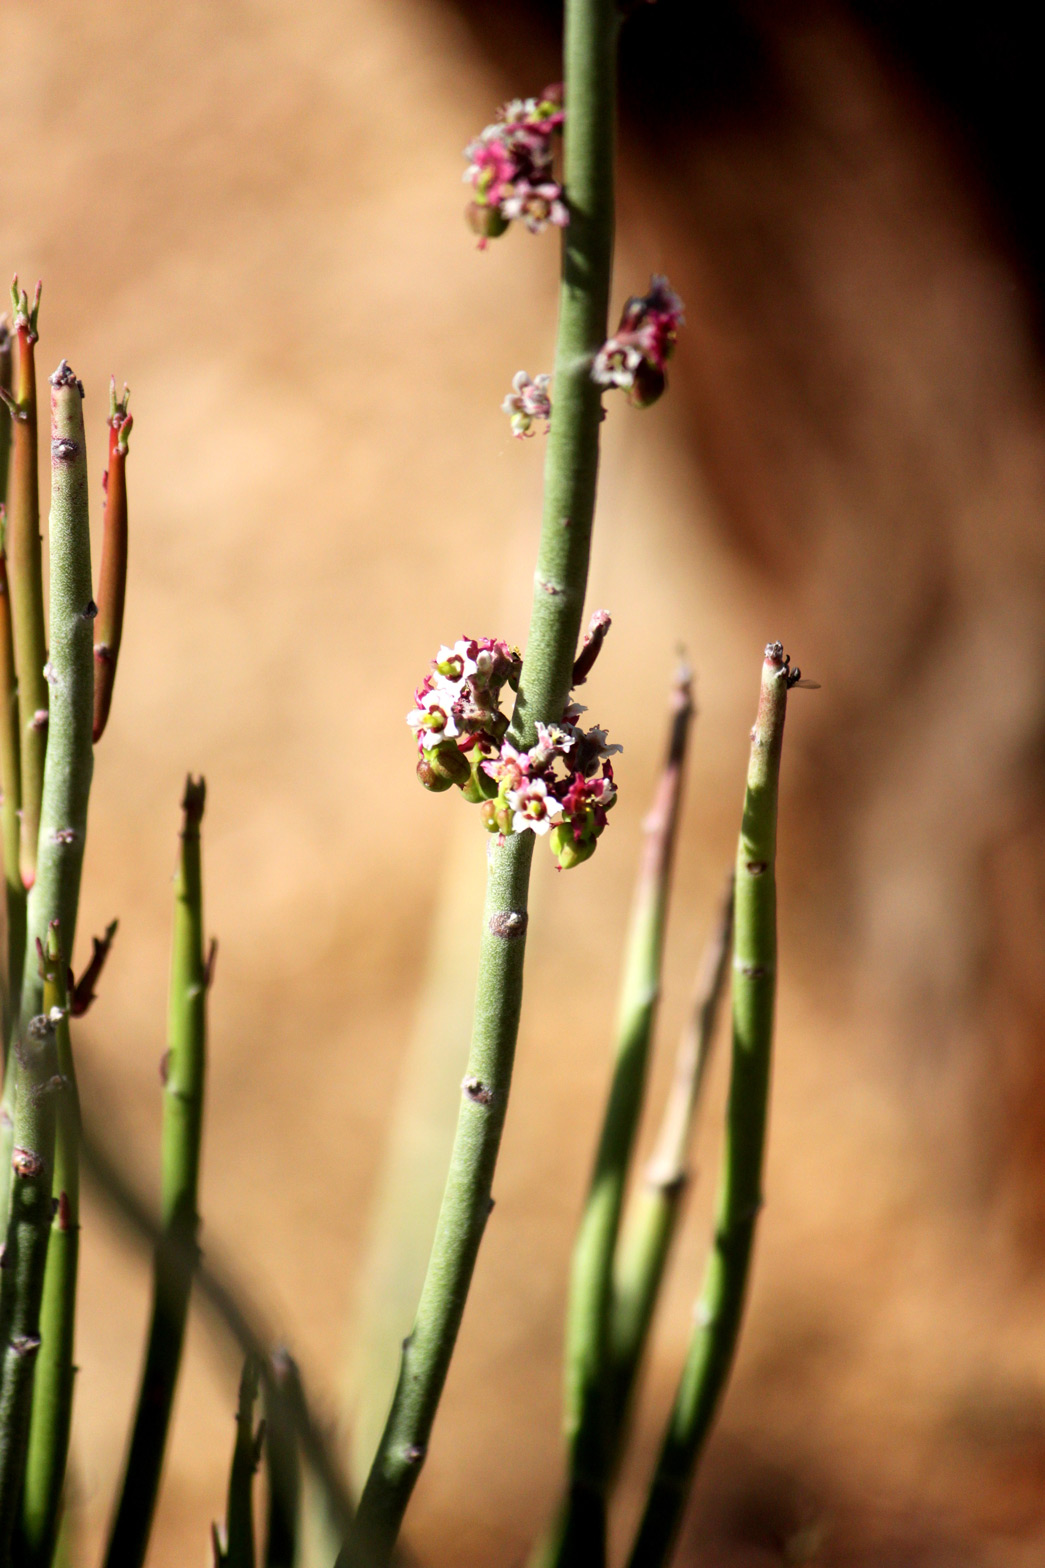 Small pink flowers hug the thin green stem of the Candelilla plant.